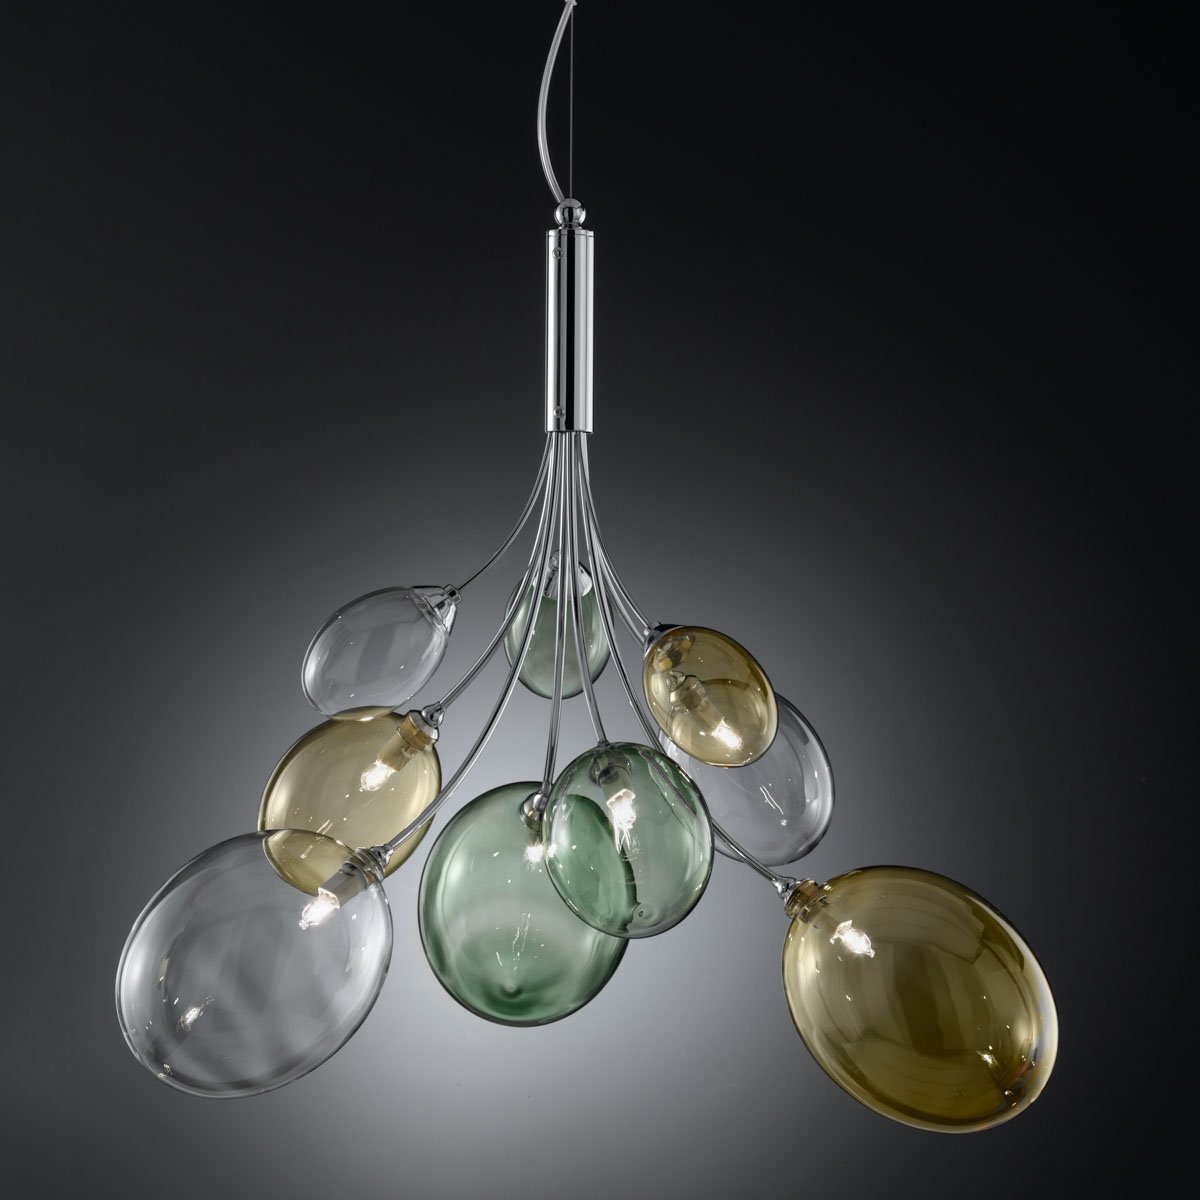 Ballon Bespoke Italian Flowing 6 Lamp Suspension with Blown Glass - Colour Options